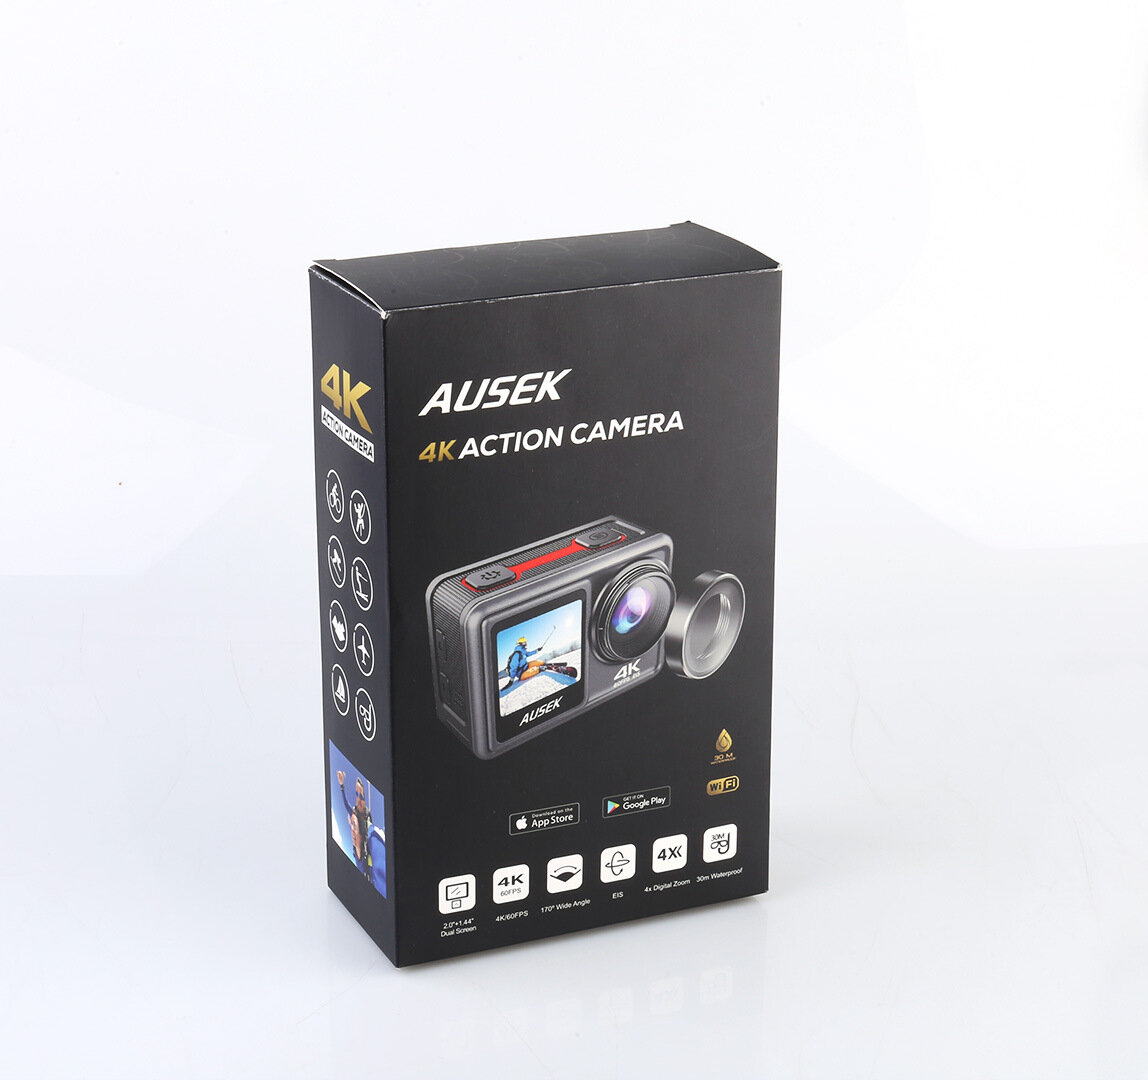 AUSEK AT-S81ER 24MP 4K 60fps Action Camera Vlog Video EIS 170 Wide Angle IPS Dual Screen 30M Waterproof 1080P Webcam Car DVR Recording Sport Camera with Filter Lens APP WiFi